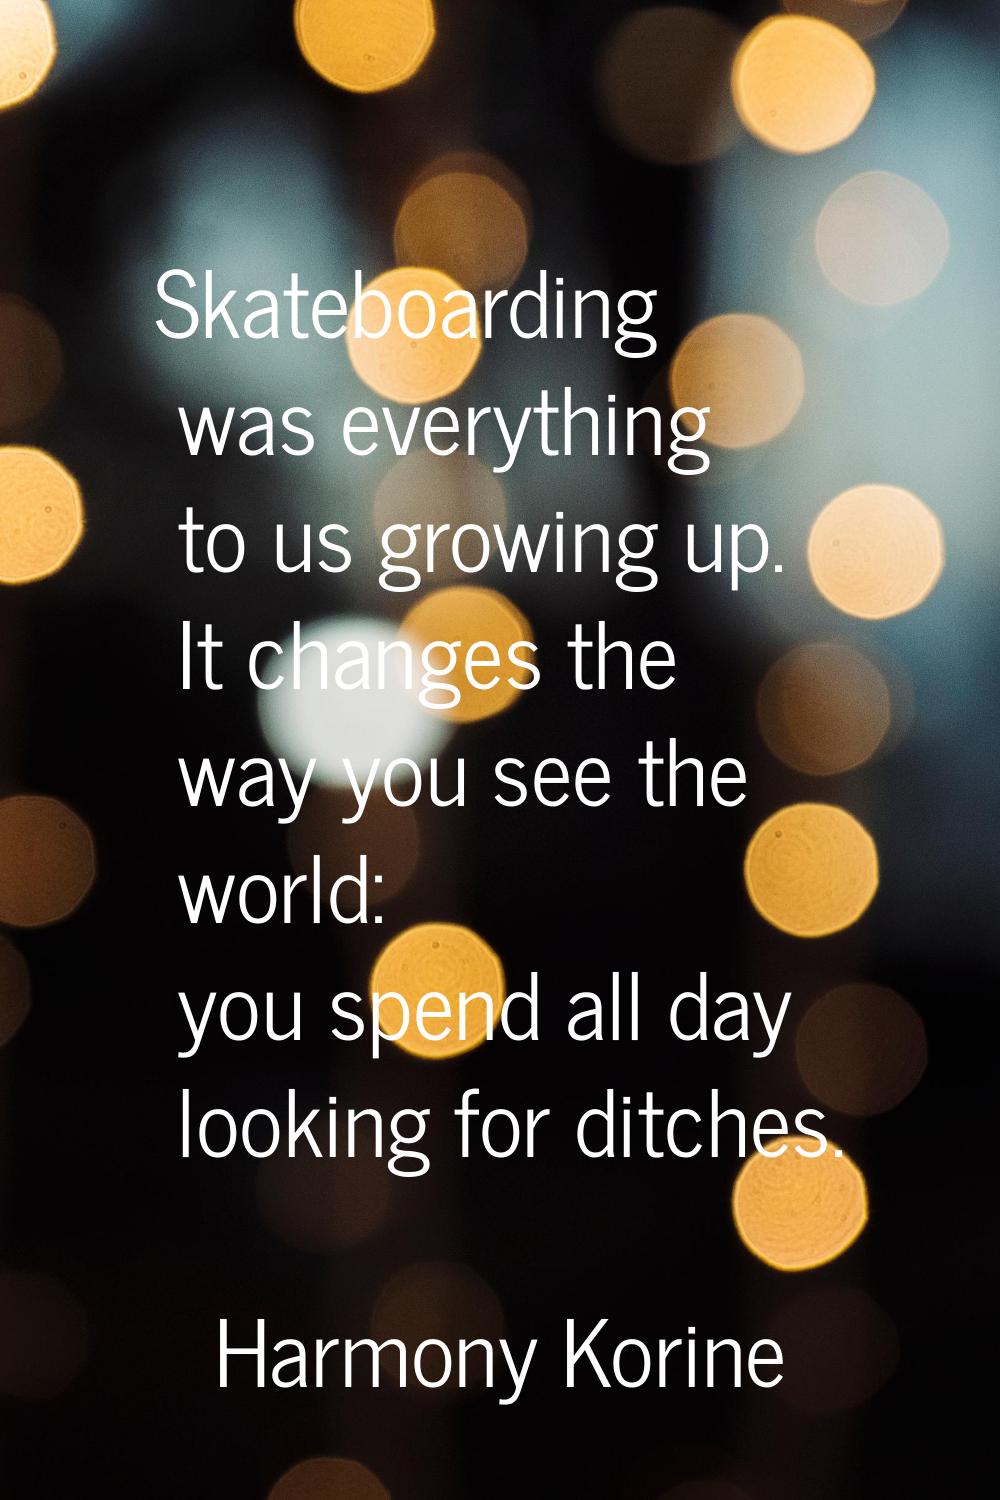 Skateboarding was everything to us growing up. It changes the way you see the world: you spend all 